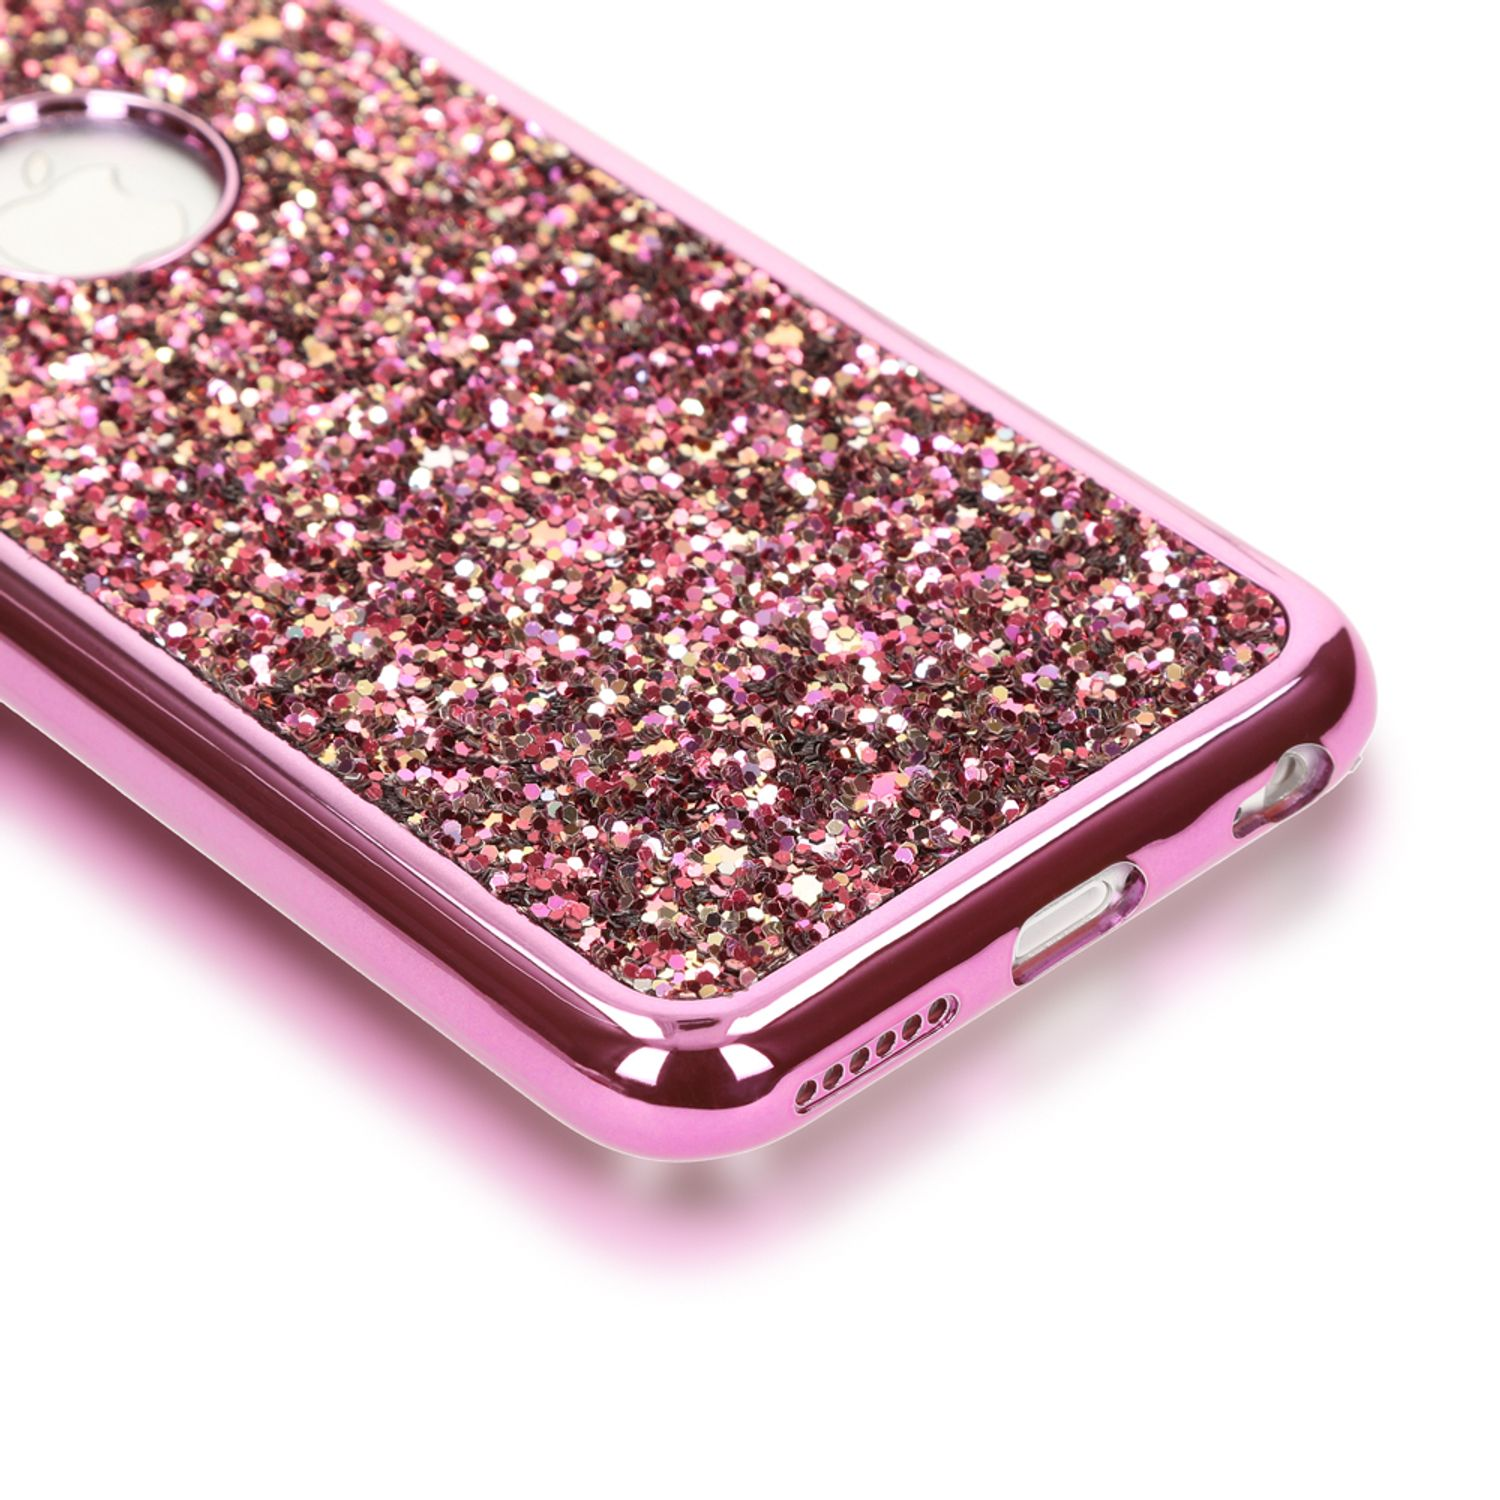 iPhone 6 Glitzer Backcover, 6s, NALIA Apple, Mouse-Look Silikon Pink Hülle, iPhone